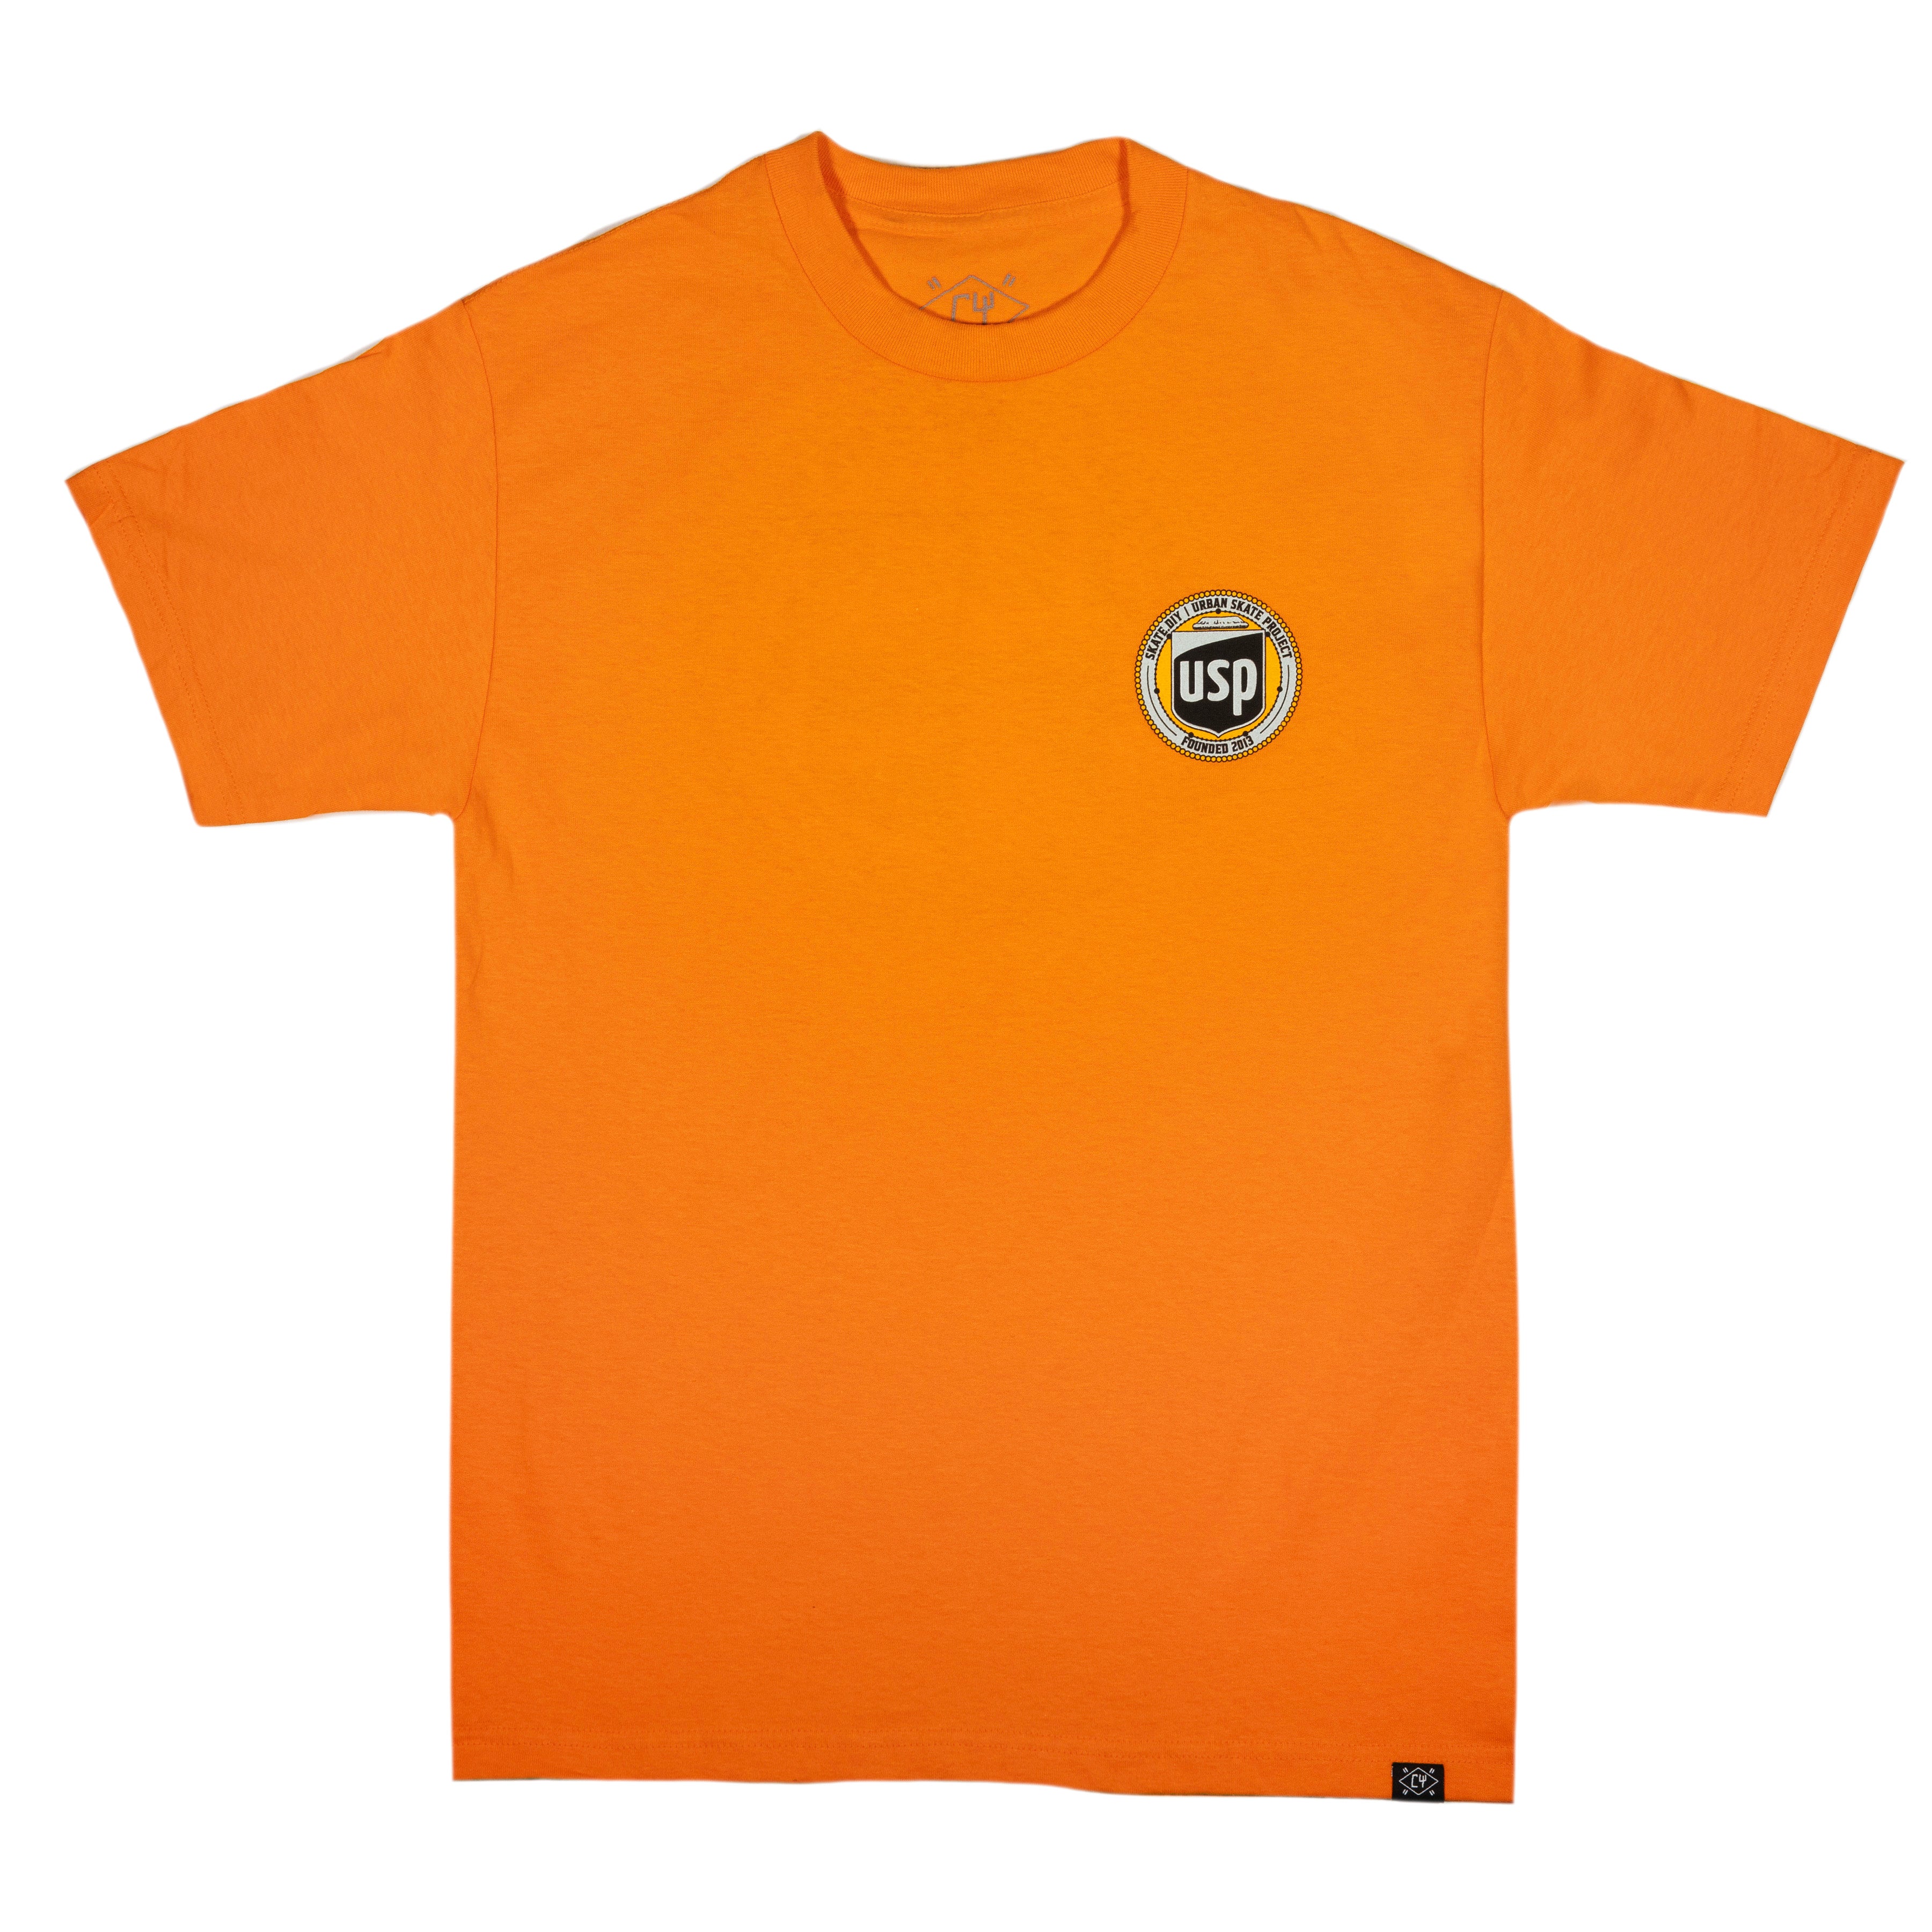 USP "10 YEAR" SEAL SS - commonyouthbrand